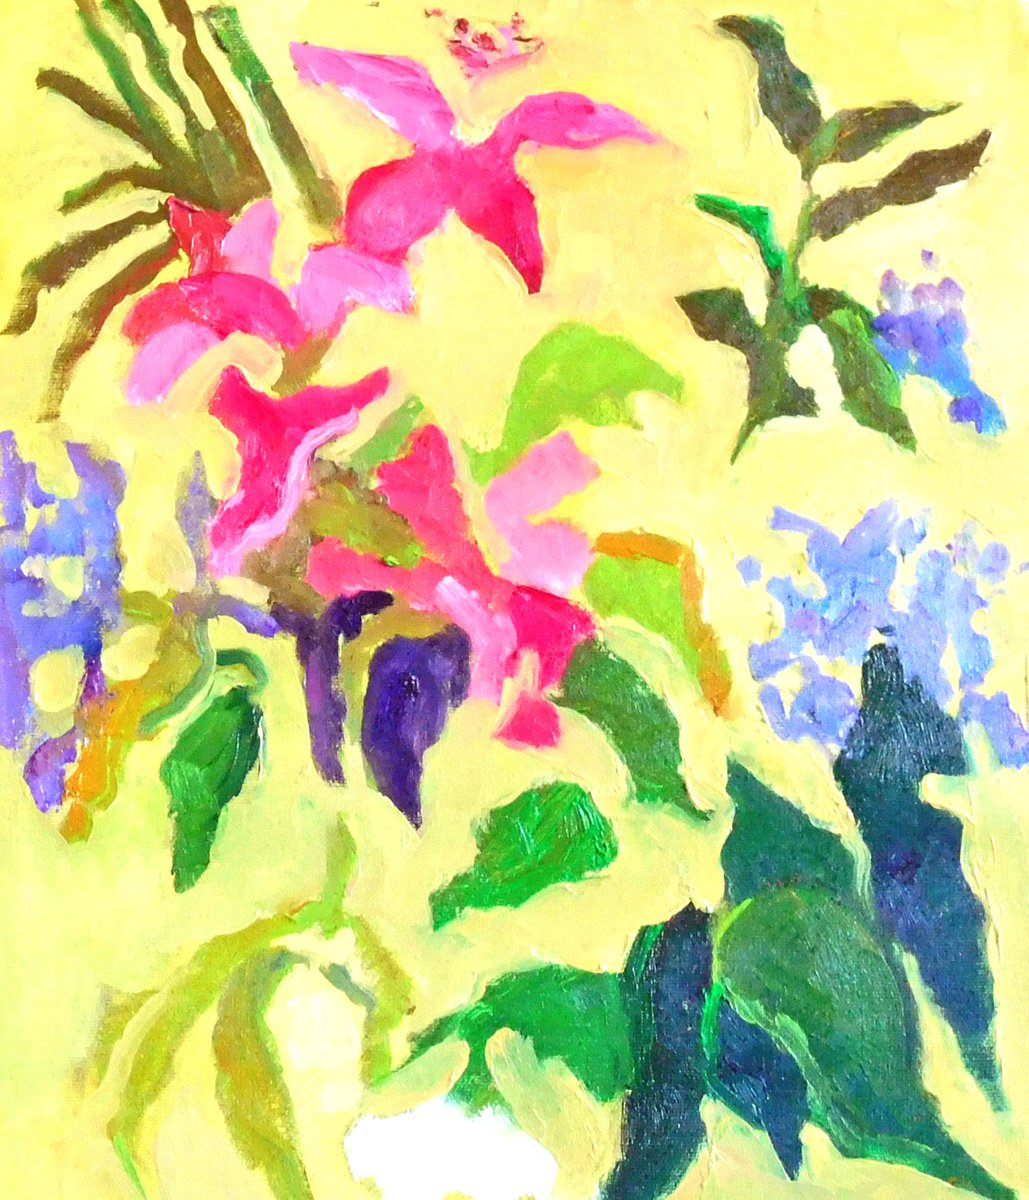 Flowers Together No. 6 by Ann Cameron McDonald